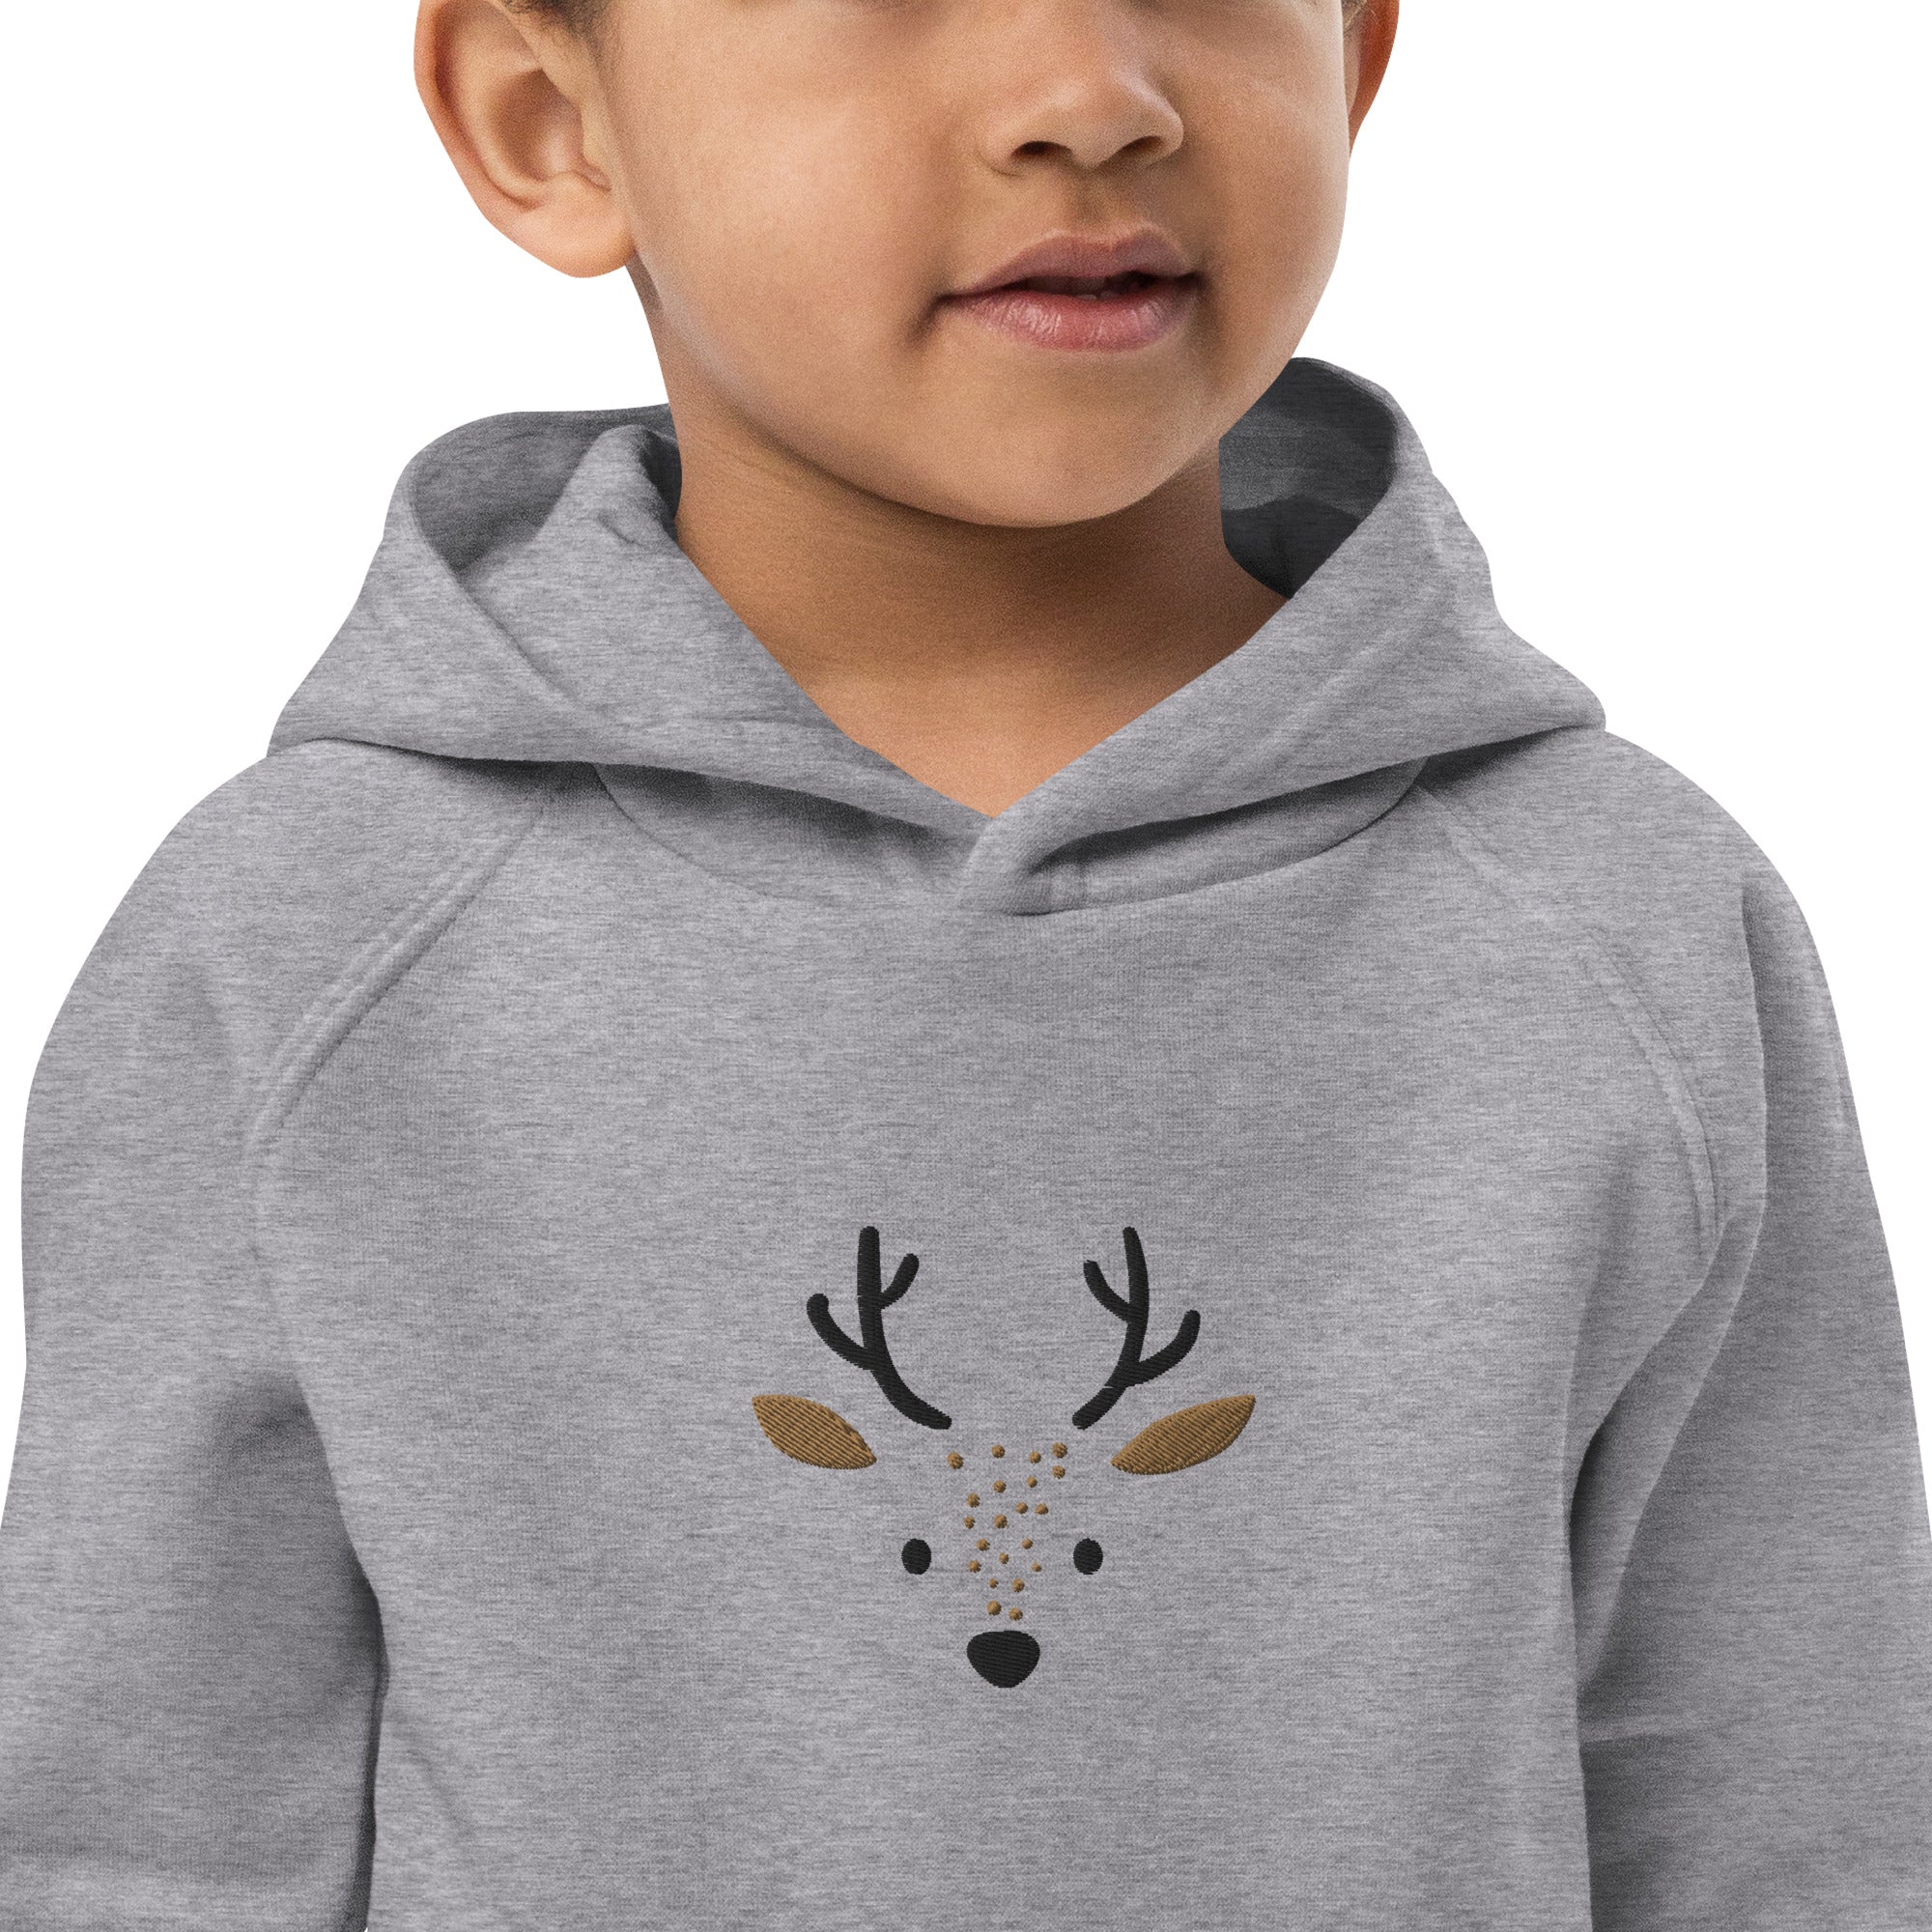 Deer 1 Kids Eco Hoodie with cute animals, Organic Cotton pullover for children, gift idea for kids, soft hoodie for kids for Christmas-0